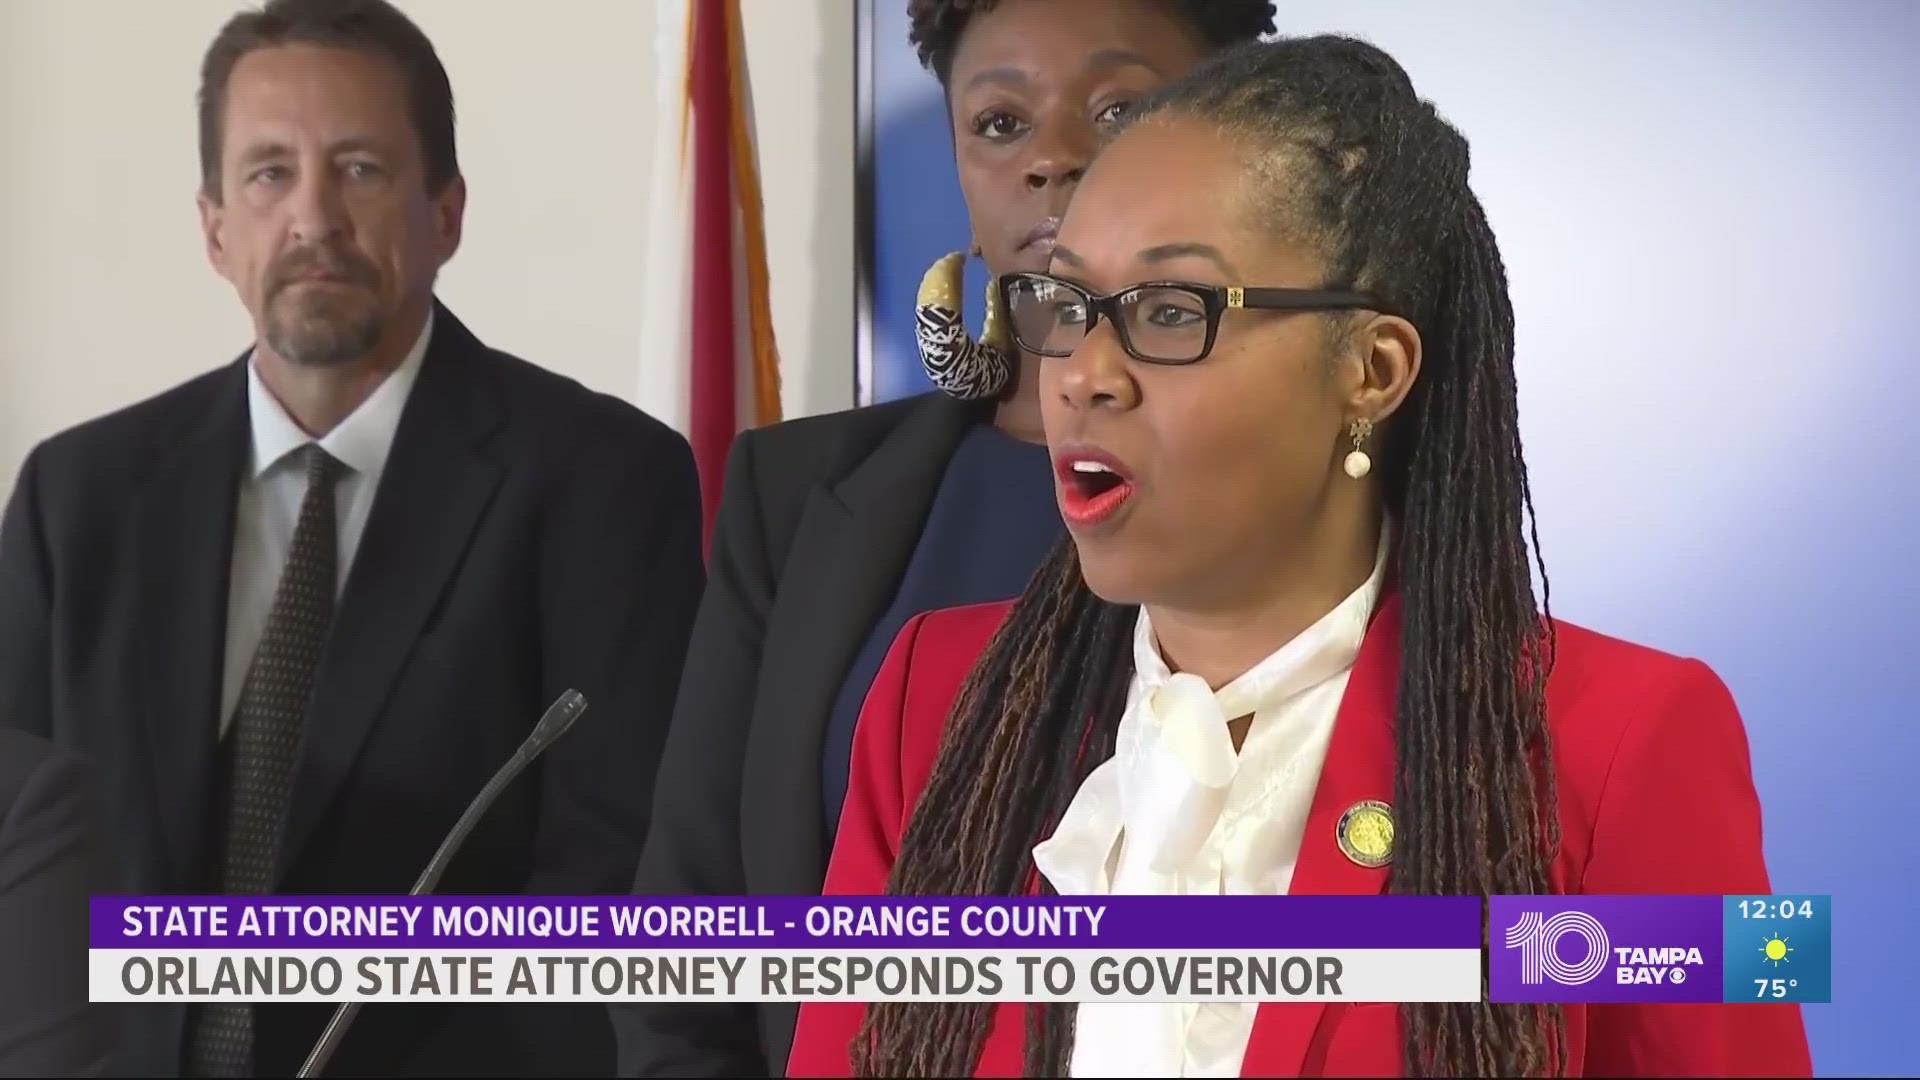 Worrell held a news conference where she shared that Gov. Ron DeSantis' claims were "baseless" and a "danger" to the community.